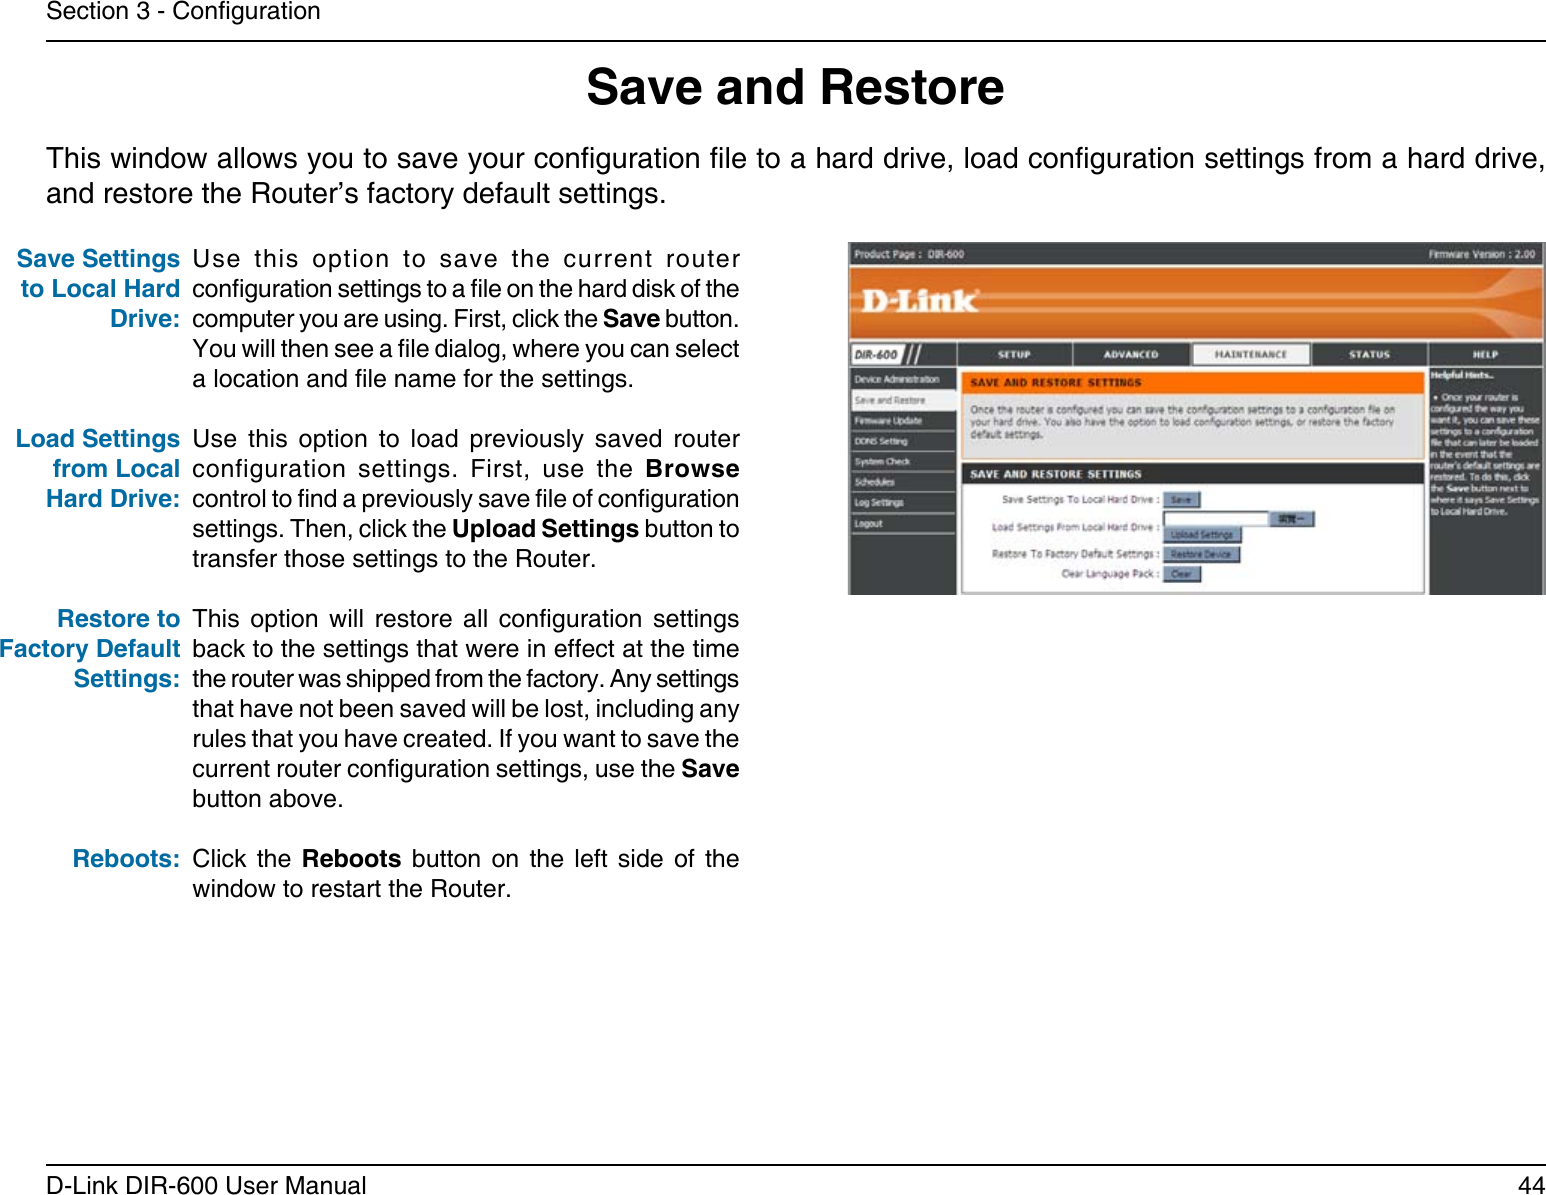 44D-Link DIR-600 User ManualSection 3 - CongurationSave and RestoreUse  this  option  to  save  the  current  router conguration settings to a le on the hard disk of the computer you are using. First, click the Save button. You will then see a le dialog, where you can select a location and le name for the settings. Use  this  option  to  load  previously  saved  router configuration  settings.  First,  use  the  Browse control to nd a previously save le of conguration settings. Then, click the Upload Settings button to transfer those settings to the Router. This  option  will  restore  all  conguration  settings back to the settings that were in effect at the time the router was shipped from the factory. Any settings that have not been saved will be lost, including any rules that you have created. If you want to save the current router conguration settings, use the Save button above. Click  the Reboots  button  on  the  left  side  of  the window to restart the Router.Save Settings to Local Hard Drive:Load Settings from Local Hard Drive:Restore to Factory Default Settings:Reboots:This window allows you to save your conguration le to a hard drive, load conguration settings from a hard drive, and restore the Router’s factory default settings.